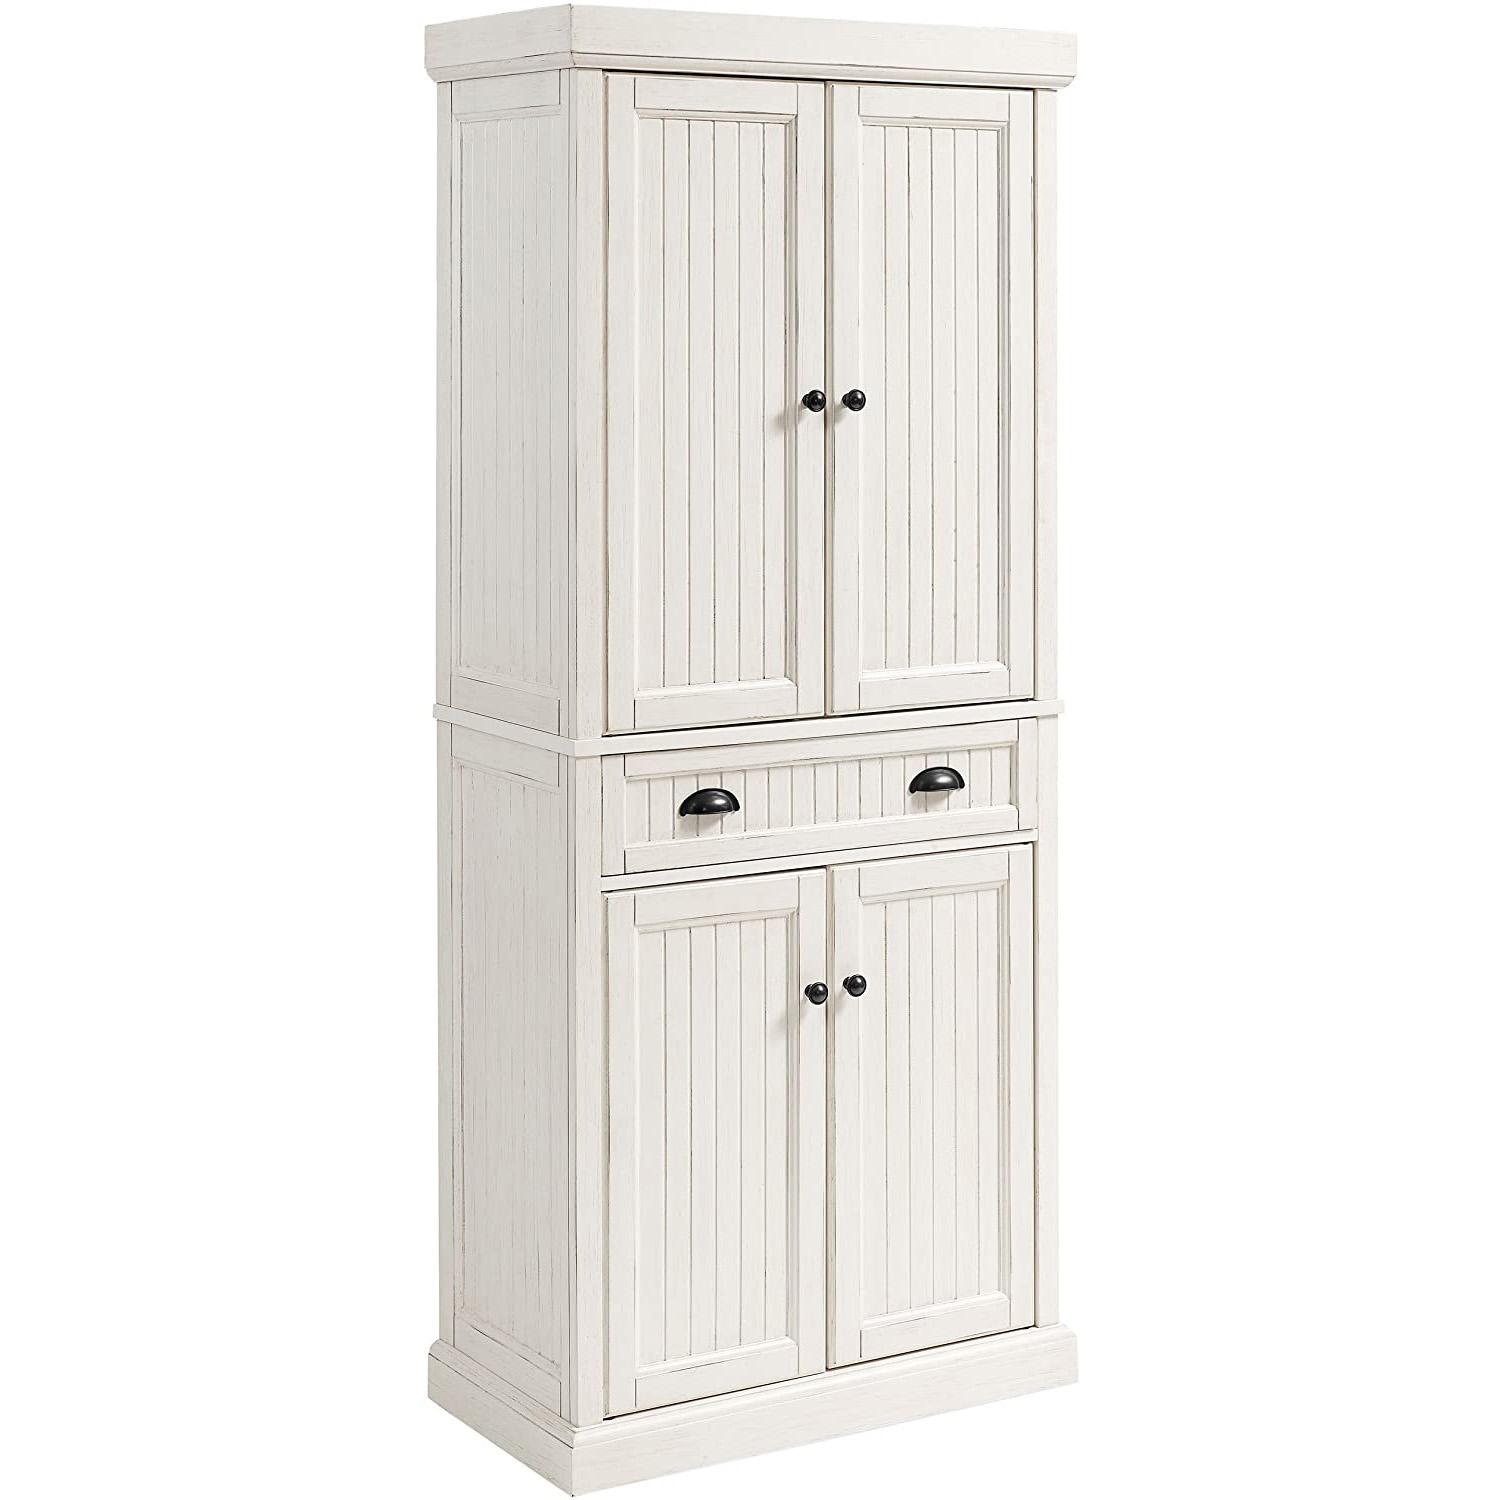 72in Crosley Seaside Kitchen Pantry for $305.18 Shipped